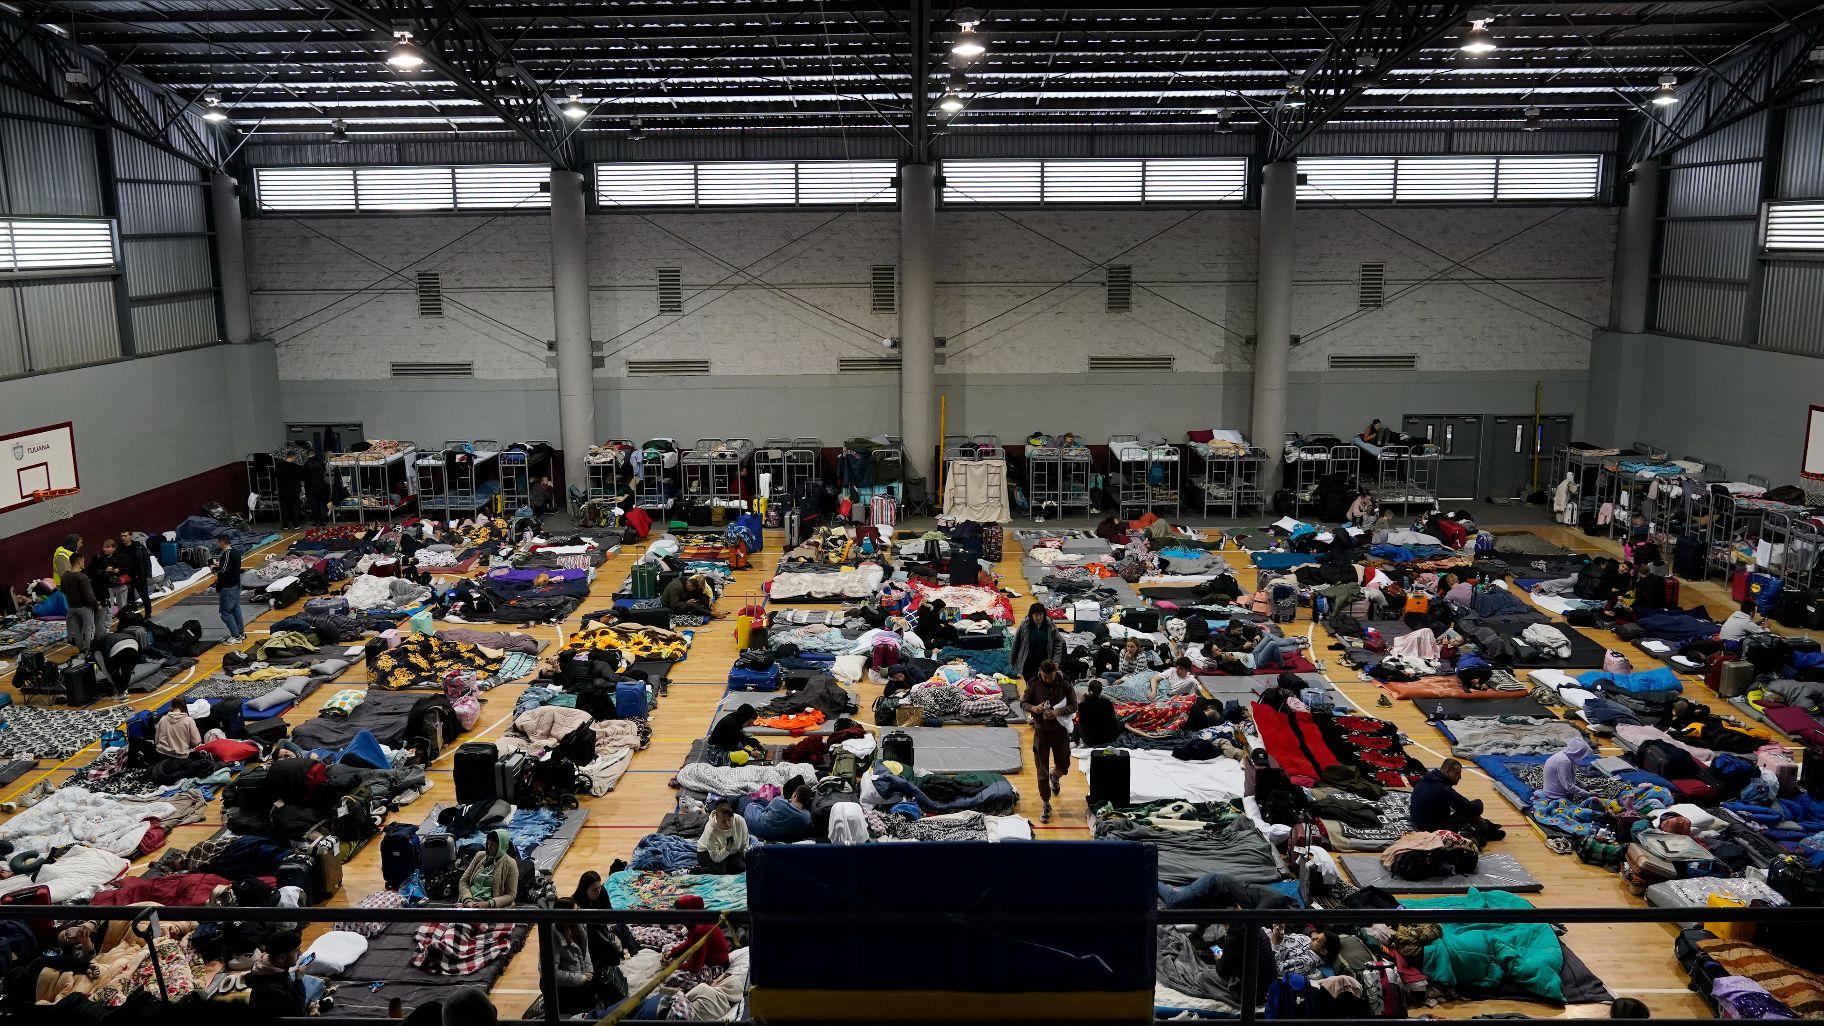  Ukrainian refugees wait in a gymnasium Tuesday, April 5, 2022, in Tijuana, Mexico. The Biden administration is allowing thousands of Ukrainians who fled their homeland when Russia invaded a year ago to stay in the United States longer. (AP Photo / Gregory Bull, File)